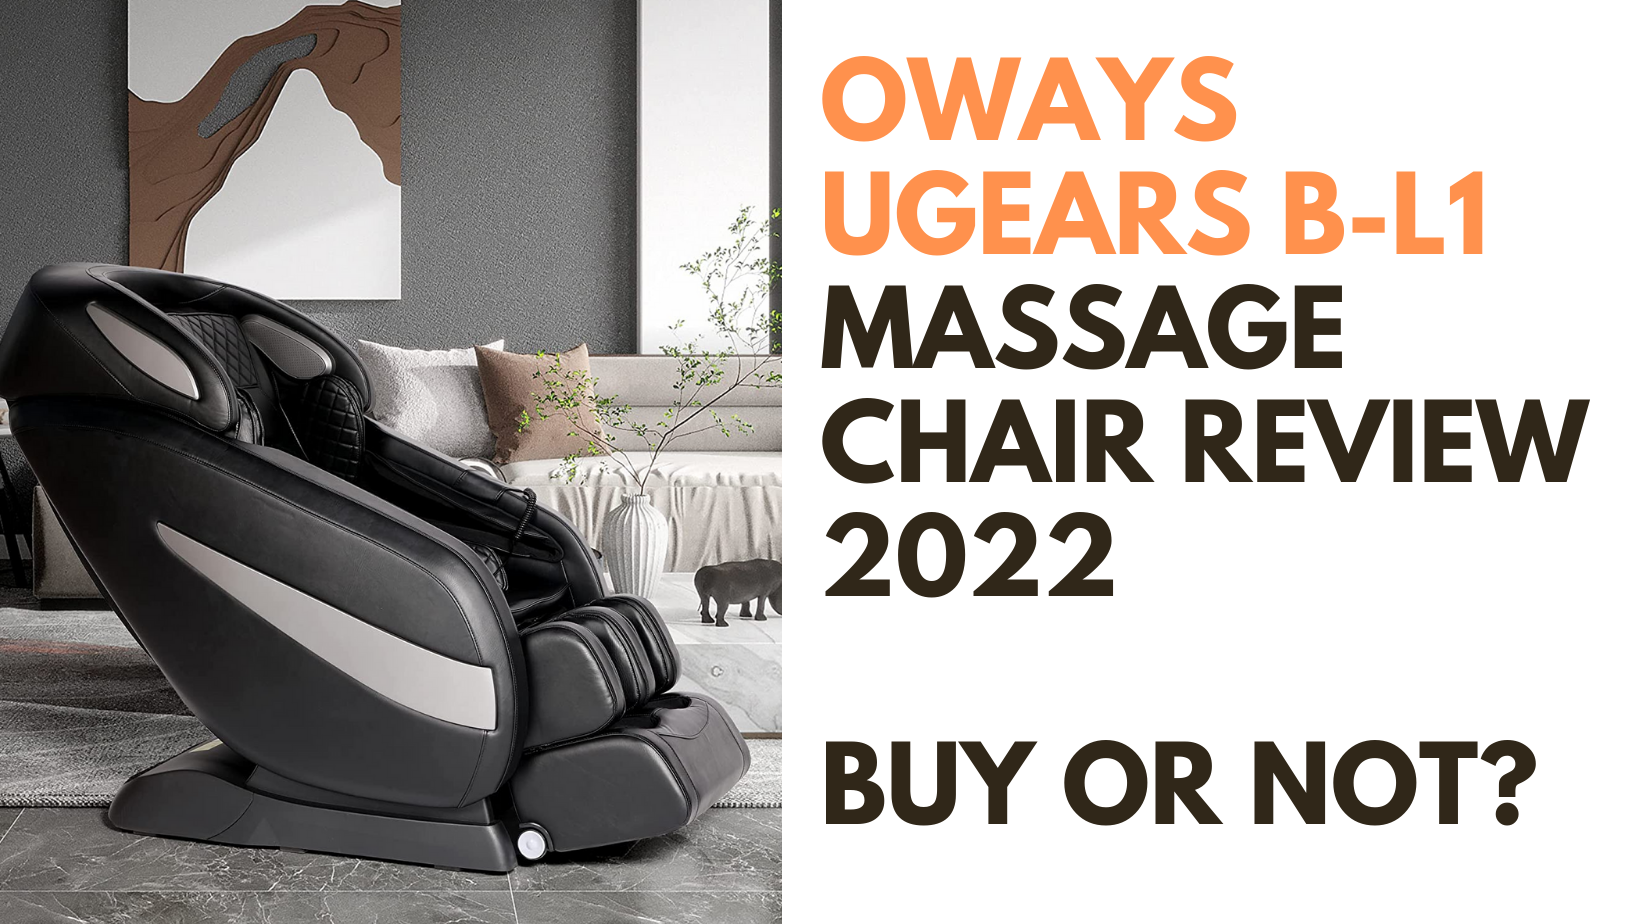 OWAYS Ugears B-L1 Massage Chair Review 2022 (Buy or Not?, under $1500)